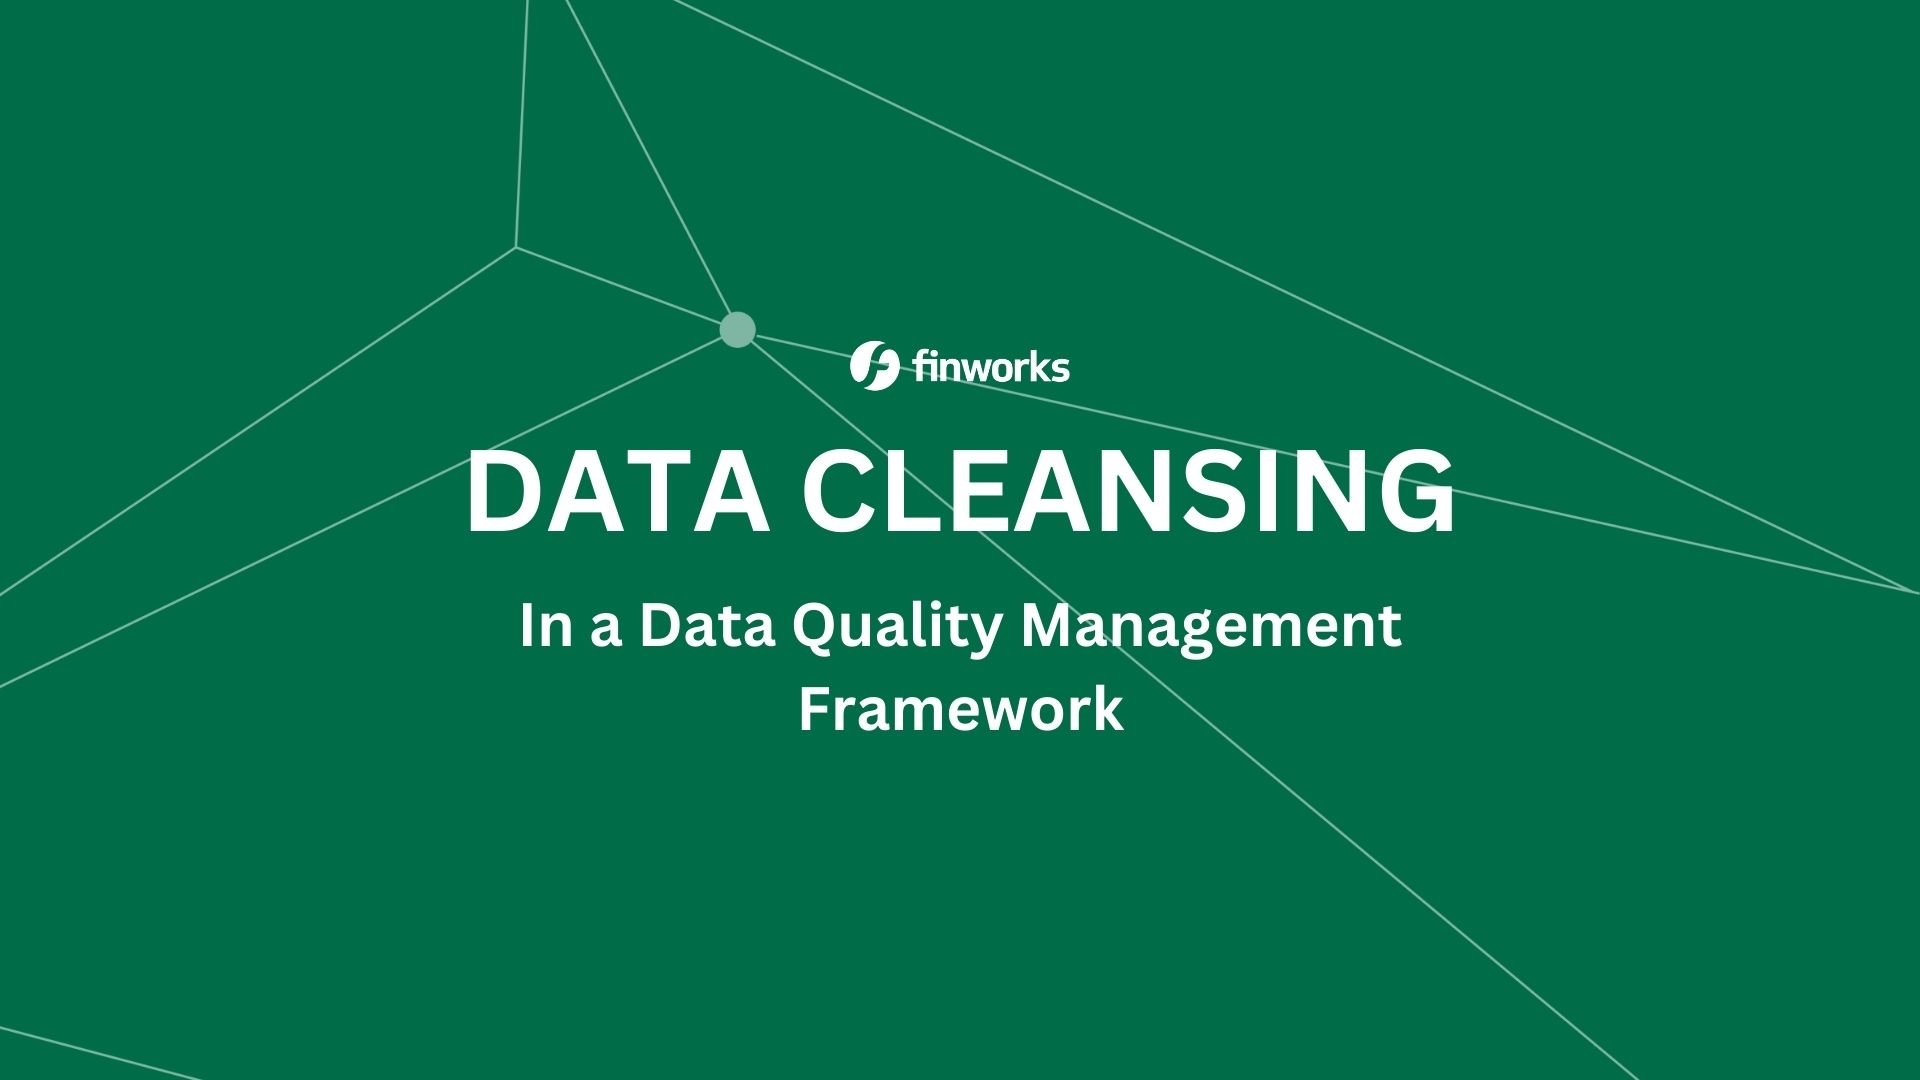 Data Cleansing in a Data Quality Management Framework